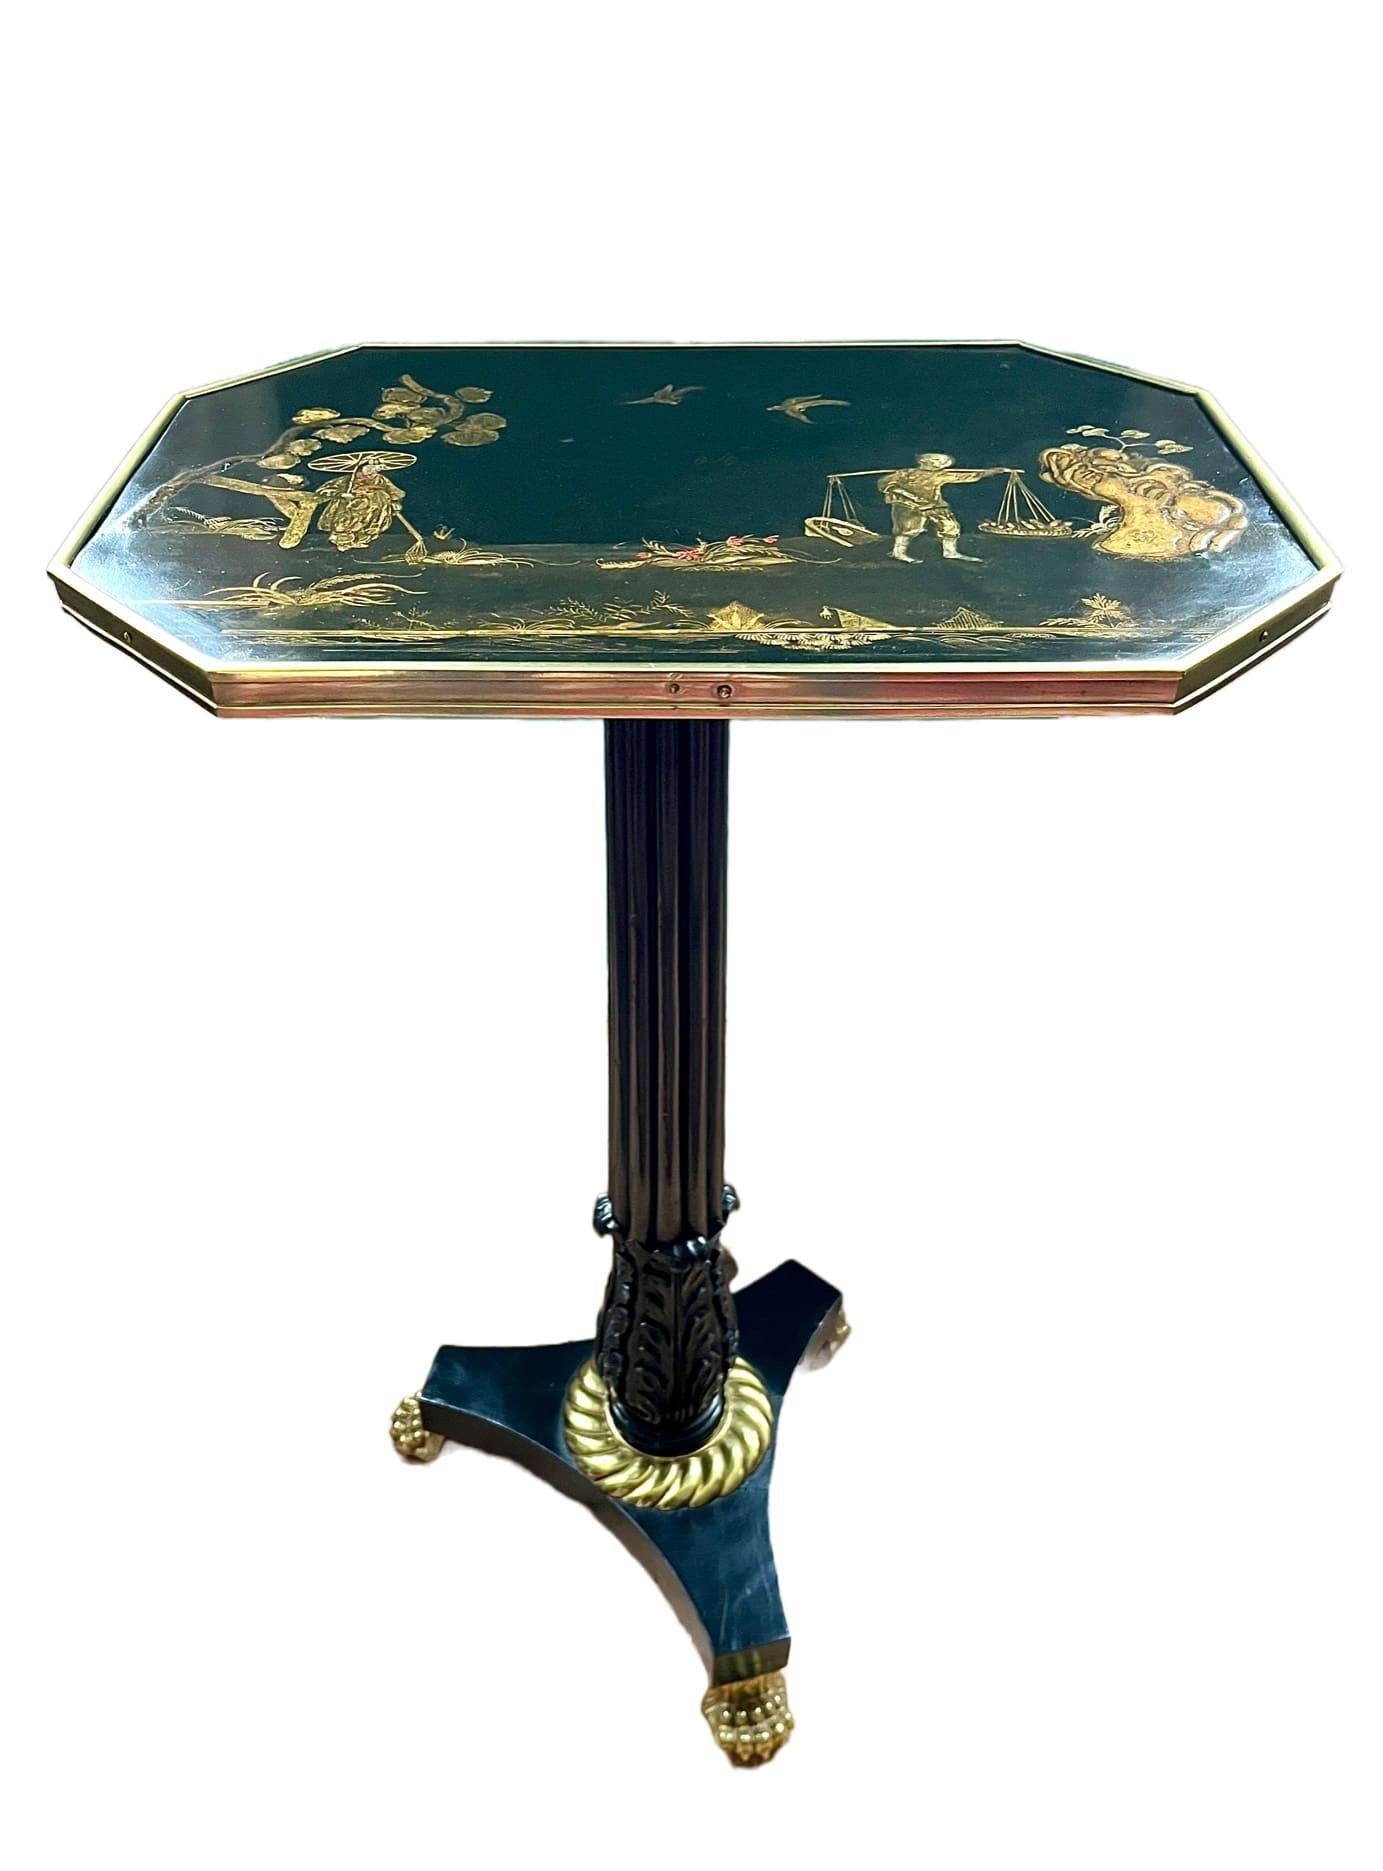 English Regency Chinoiserie Lacquer Top Ebonized Brass Mounted Stand, circa 1820 For Sale 7